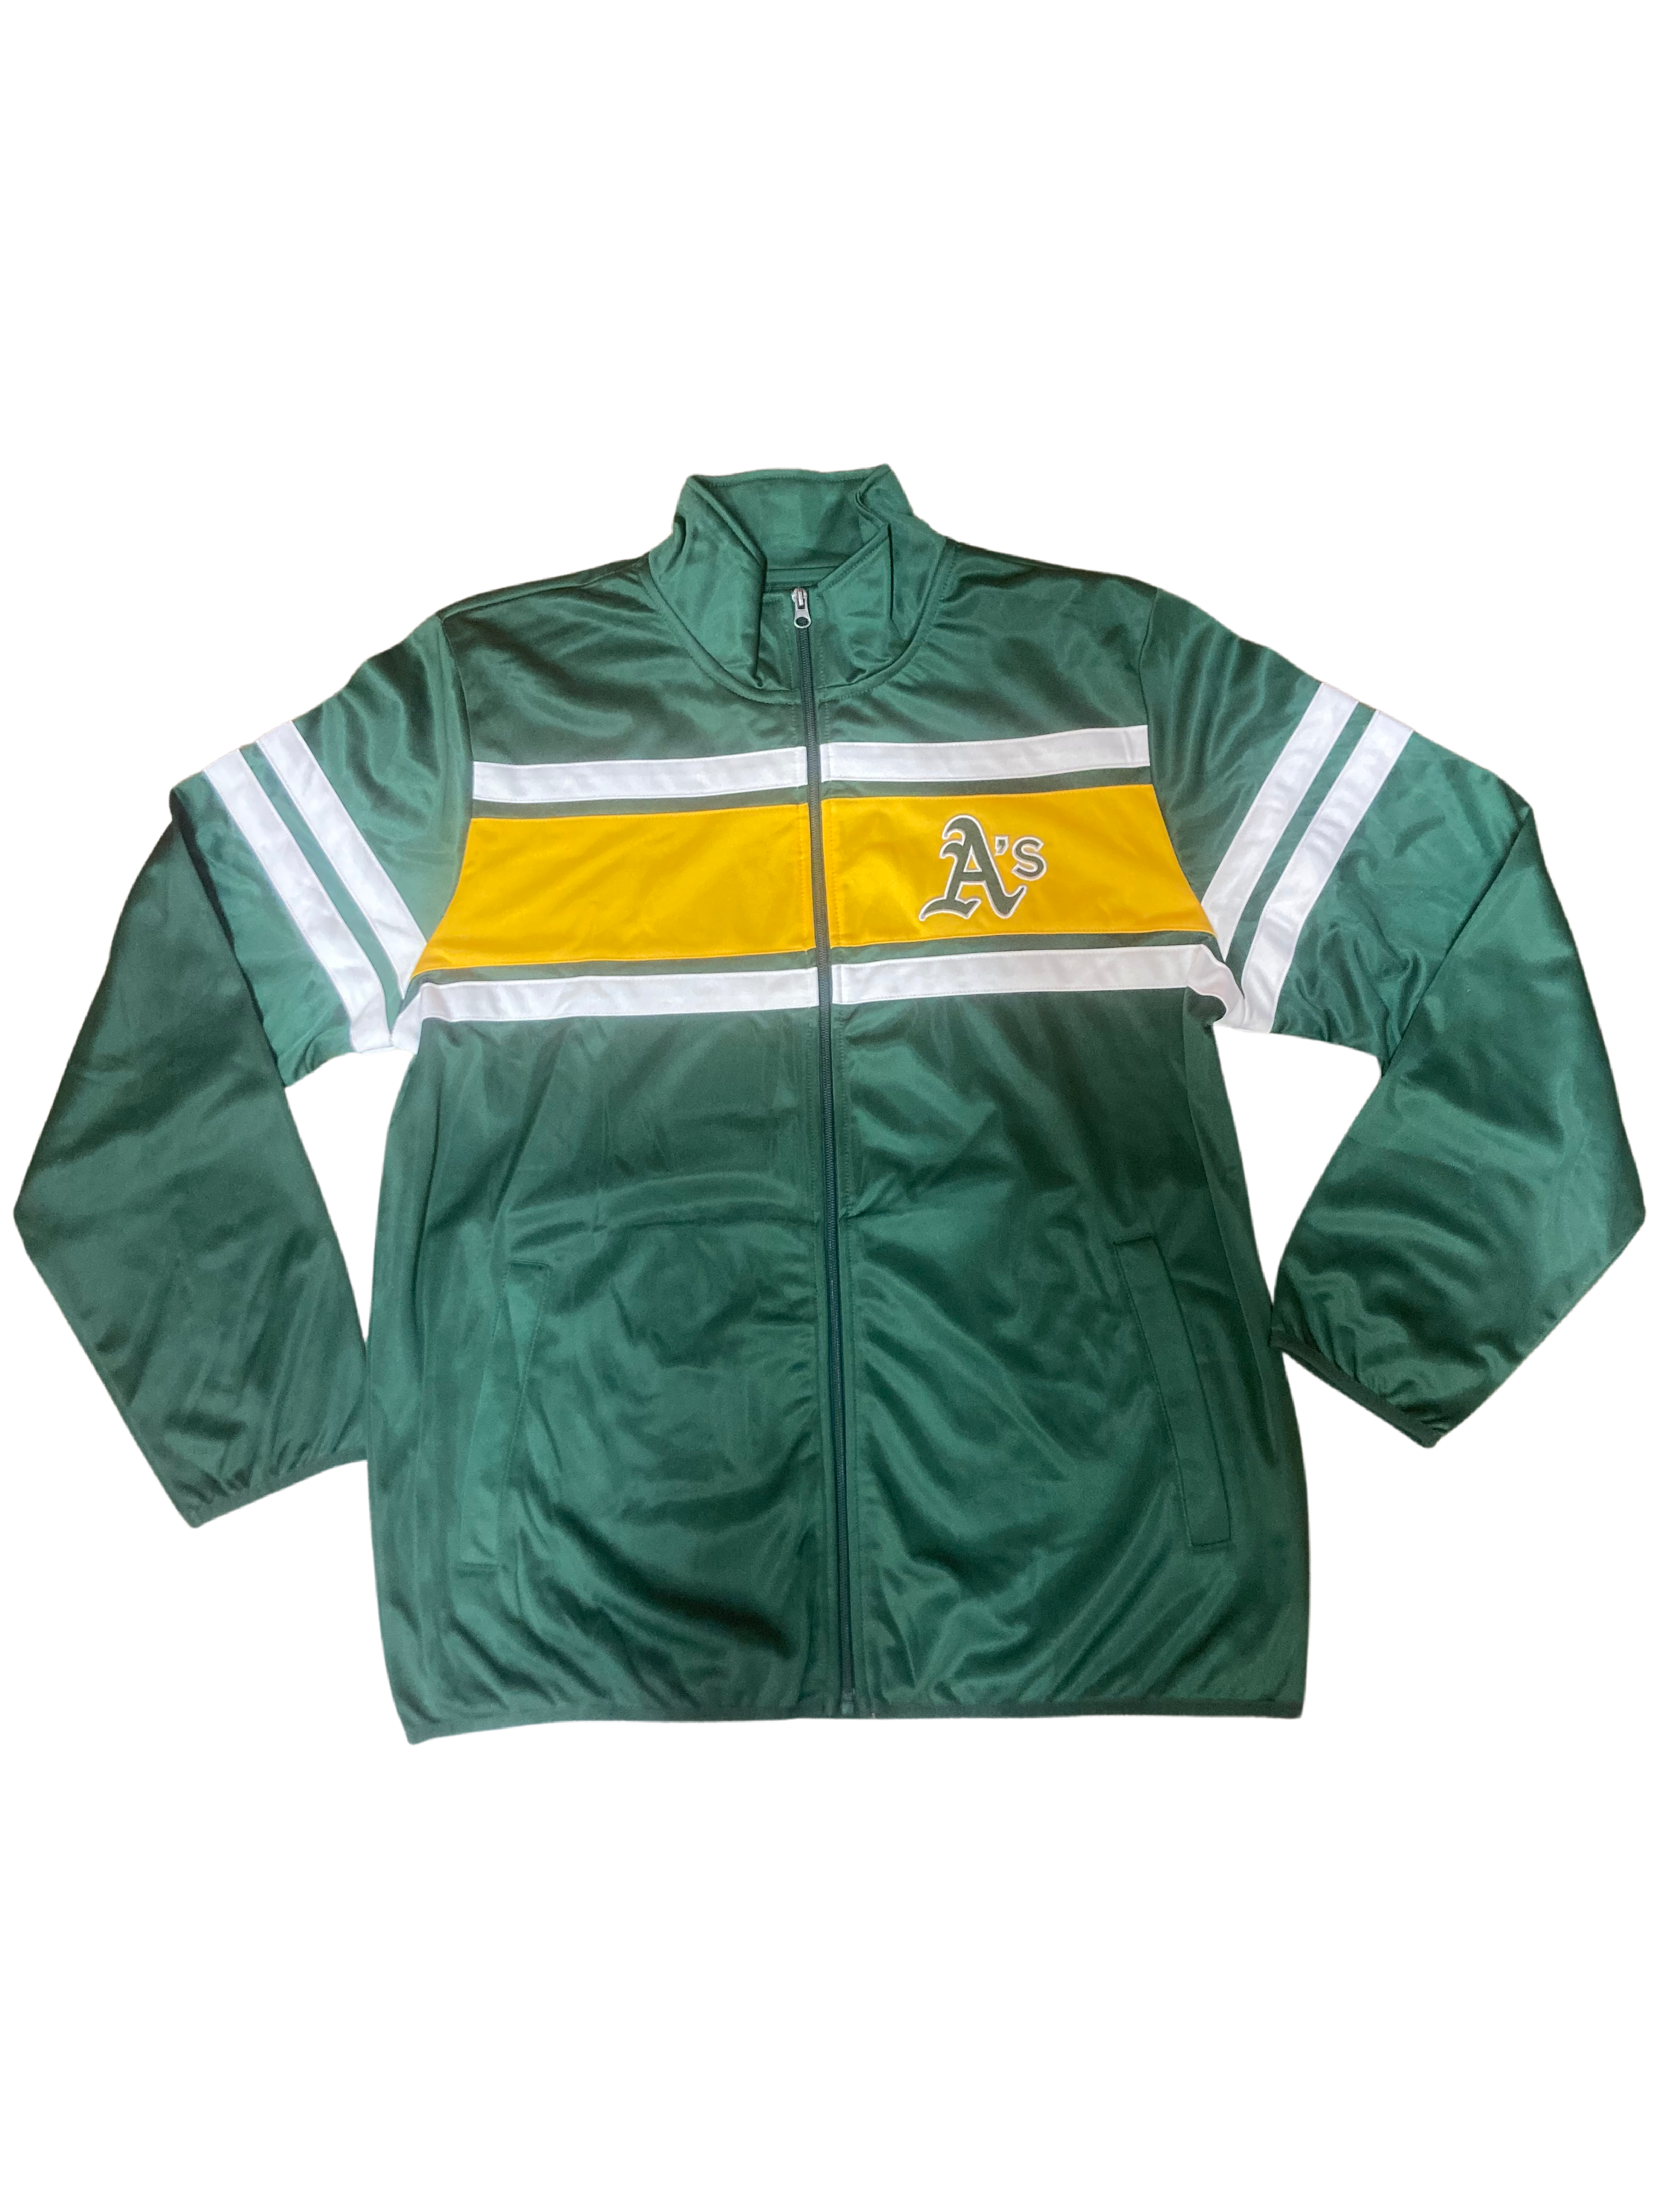 Oakland A's G-III Full-Zip Track Jacket - Green/Yellow/White